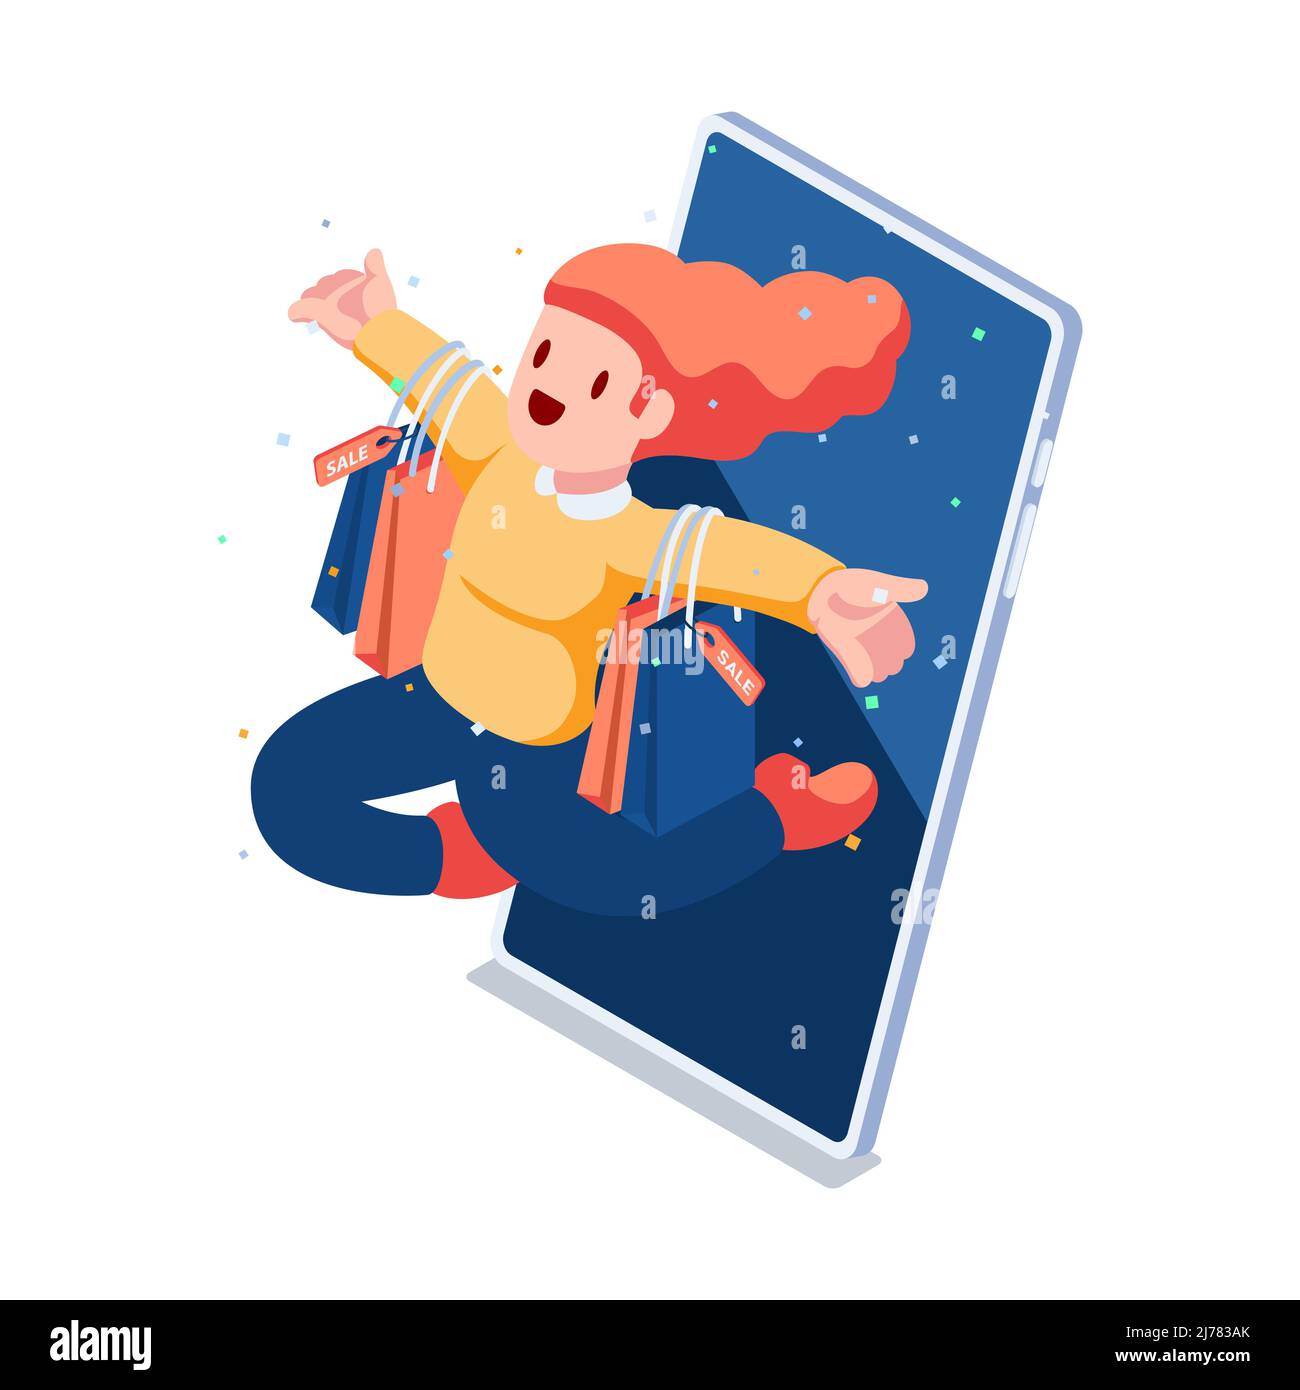 Flat 3d Isometric Woman Carrying Shopping Bags Come Out from Smartphone. Online Shopping Concept. Stock Vector